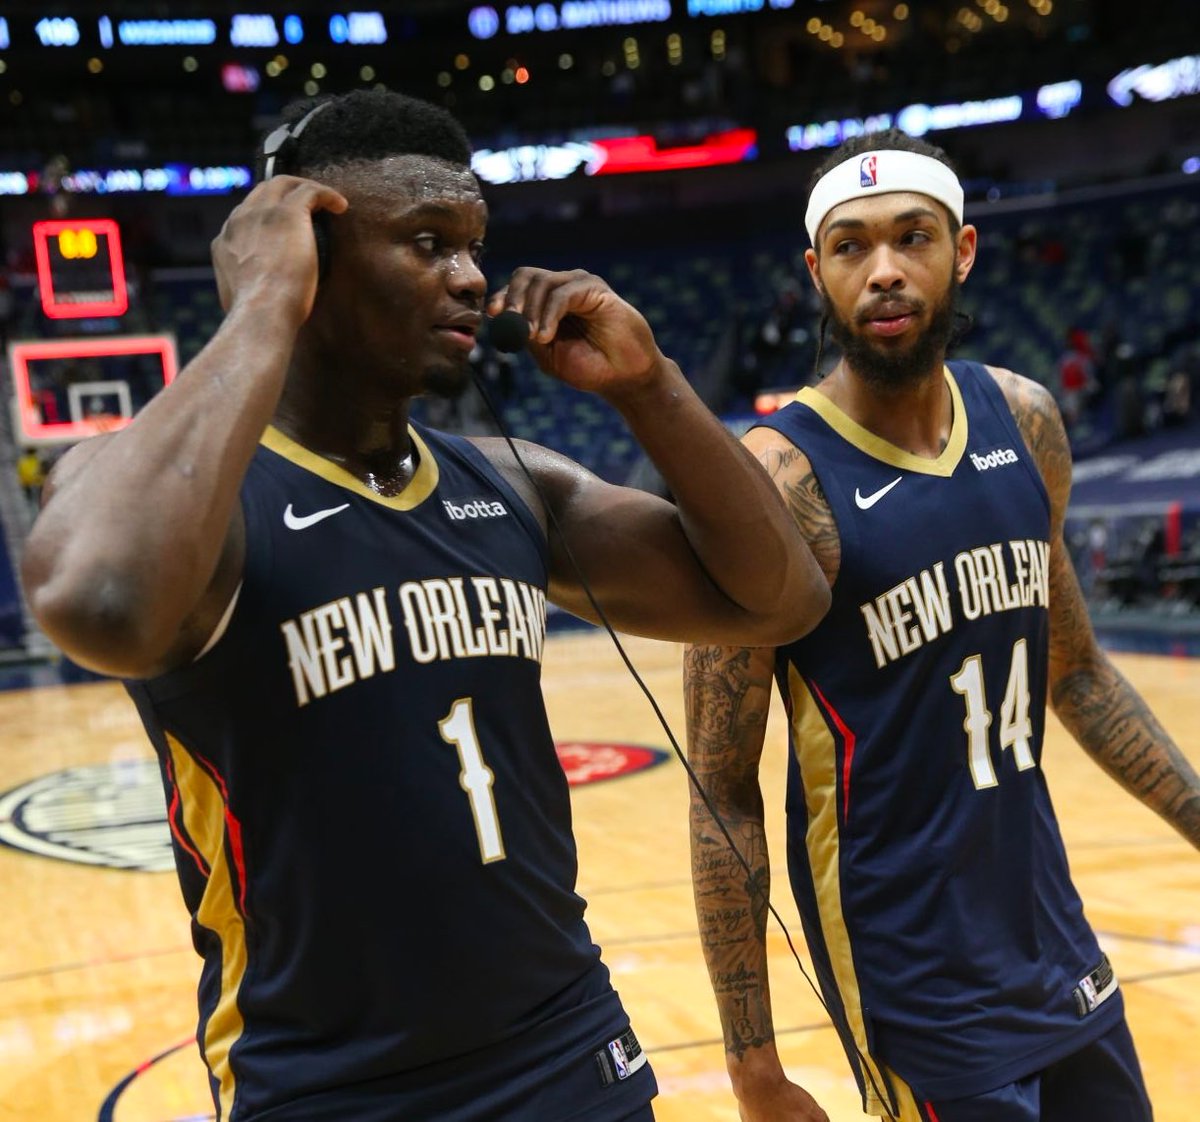 The Pelicans still got 42 wins in 2022-23 in spite of... Brandon Ingram's 37 games missed Zion Williamson's 52 games missed Give us a healthy season and we'll get 55+ wins easily 🔥